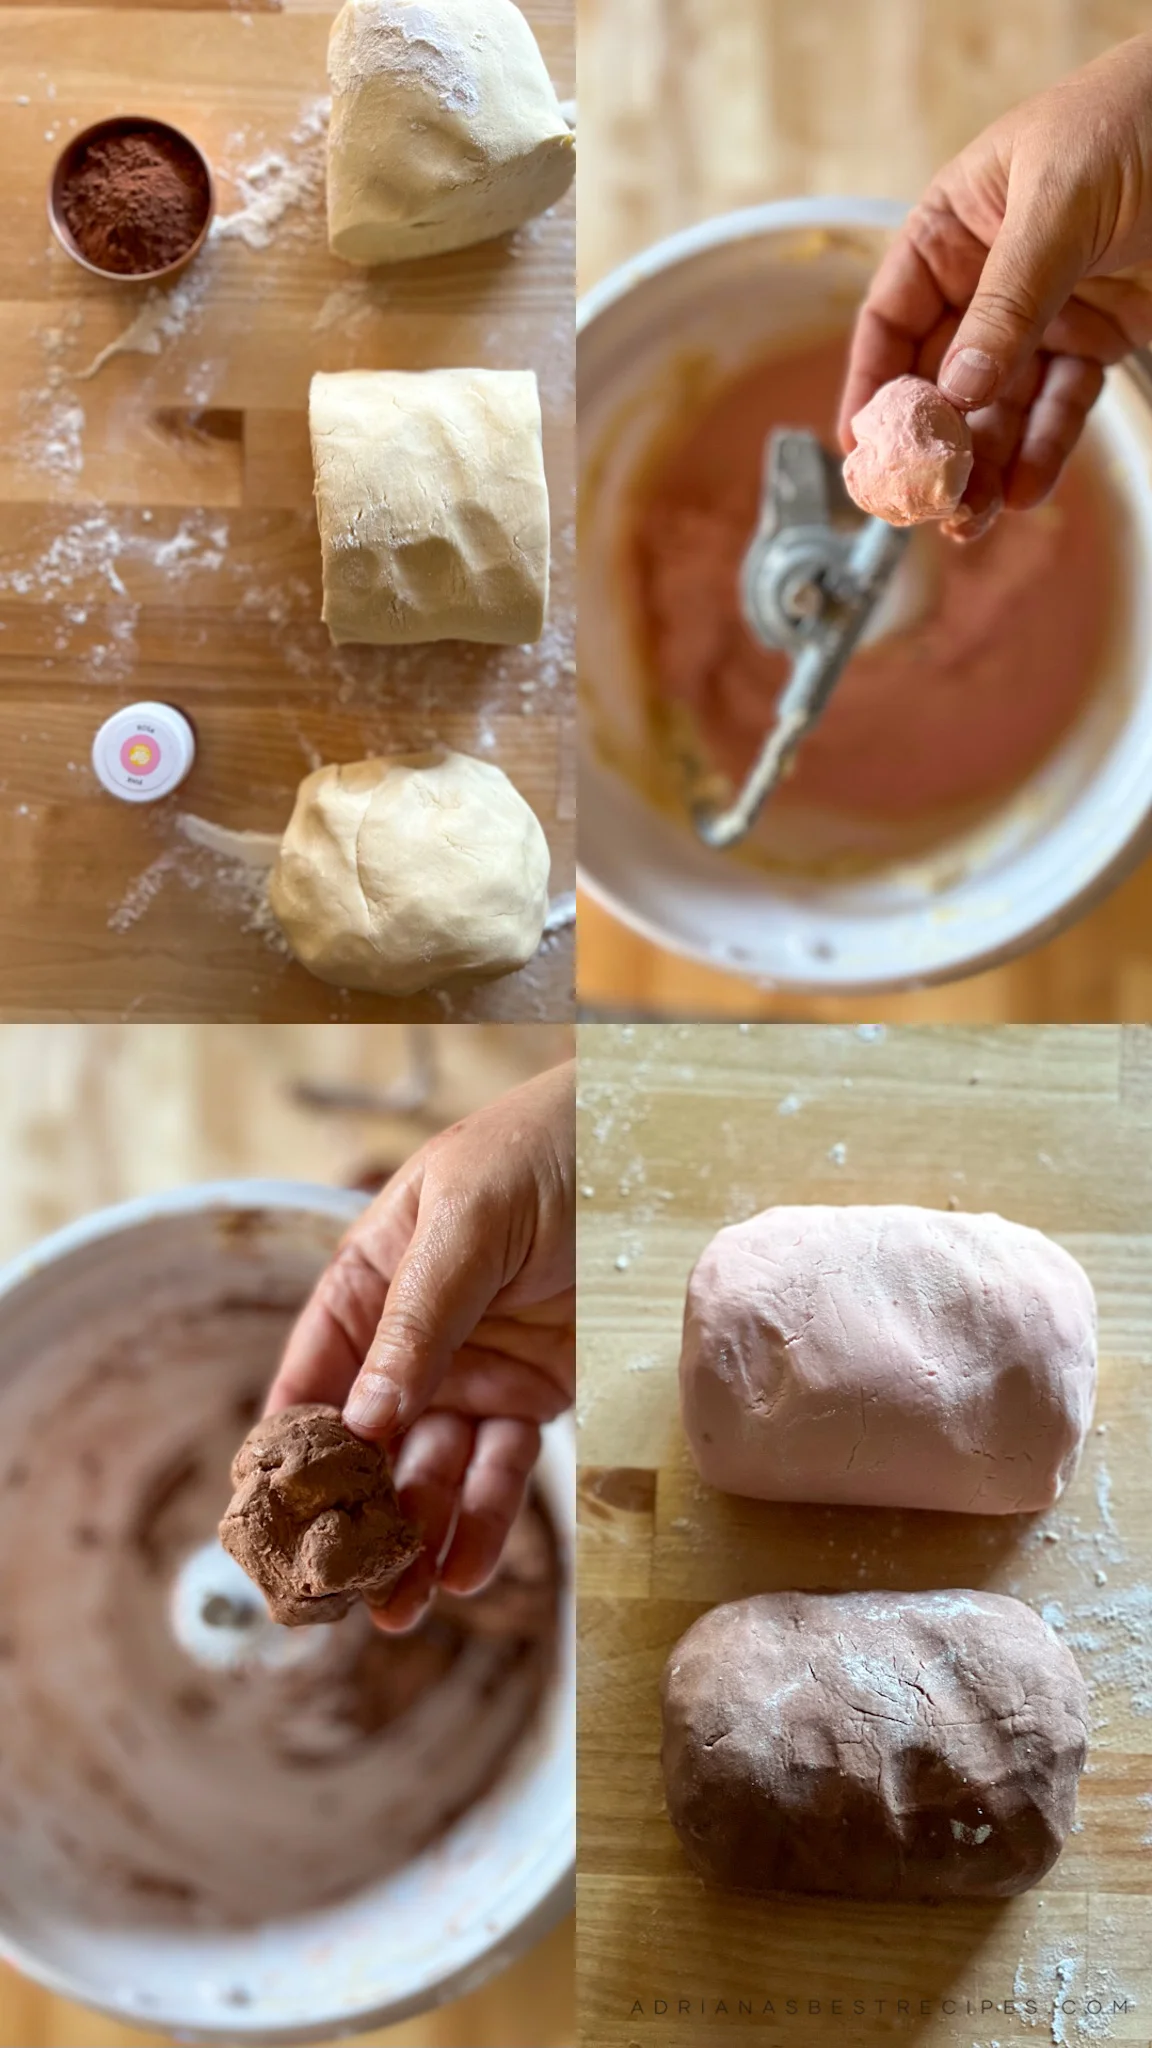 Step by step on the dough consistency